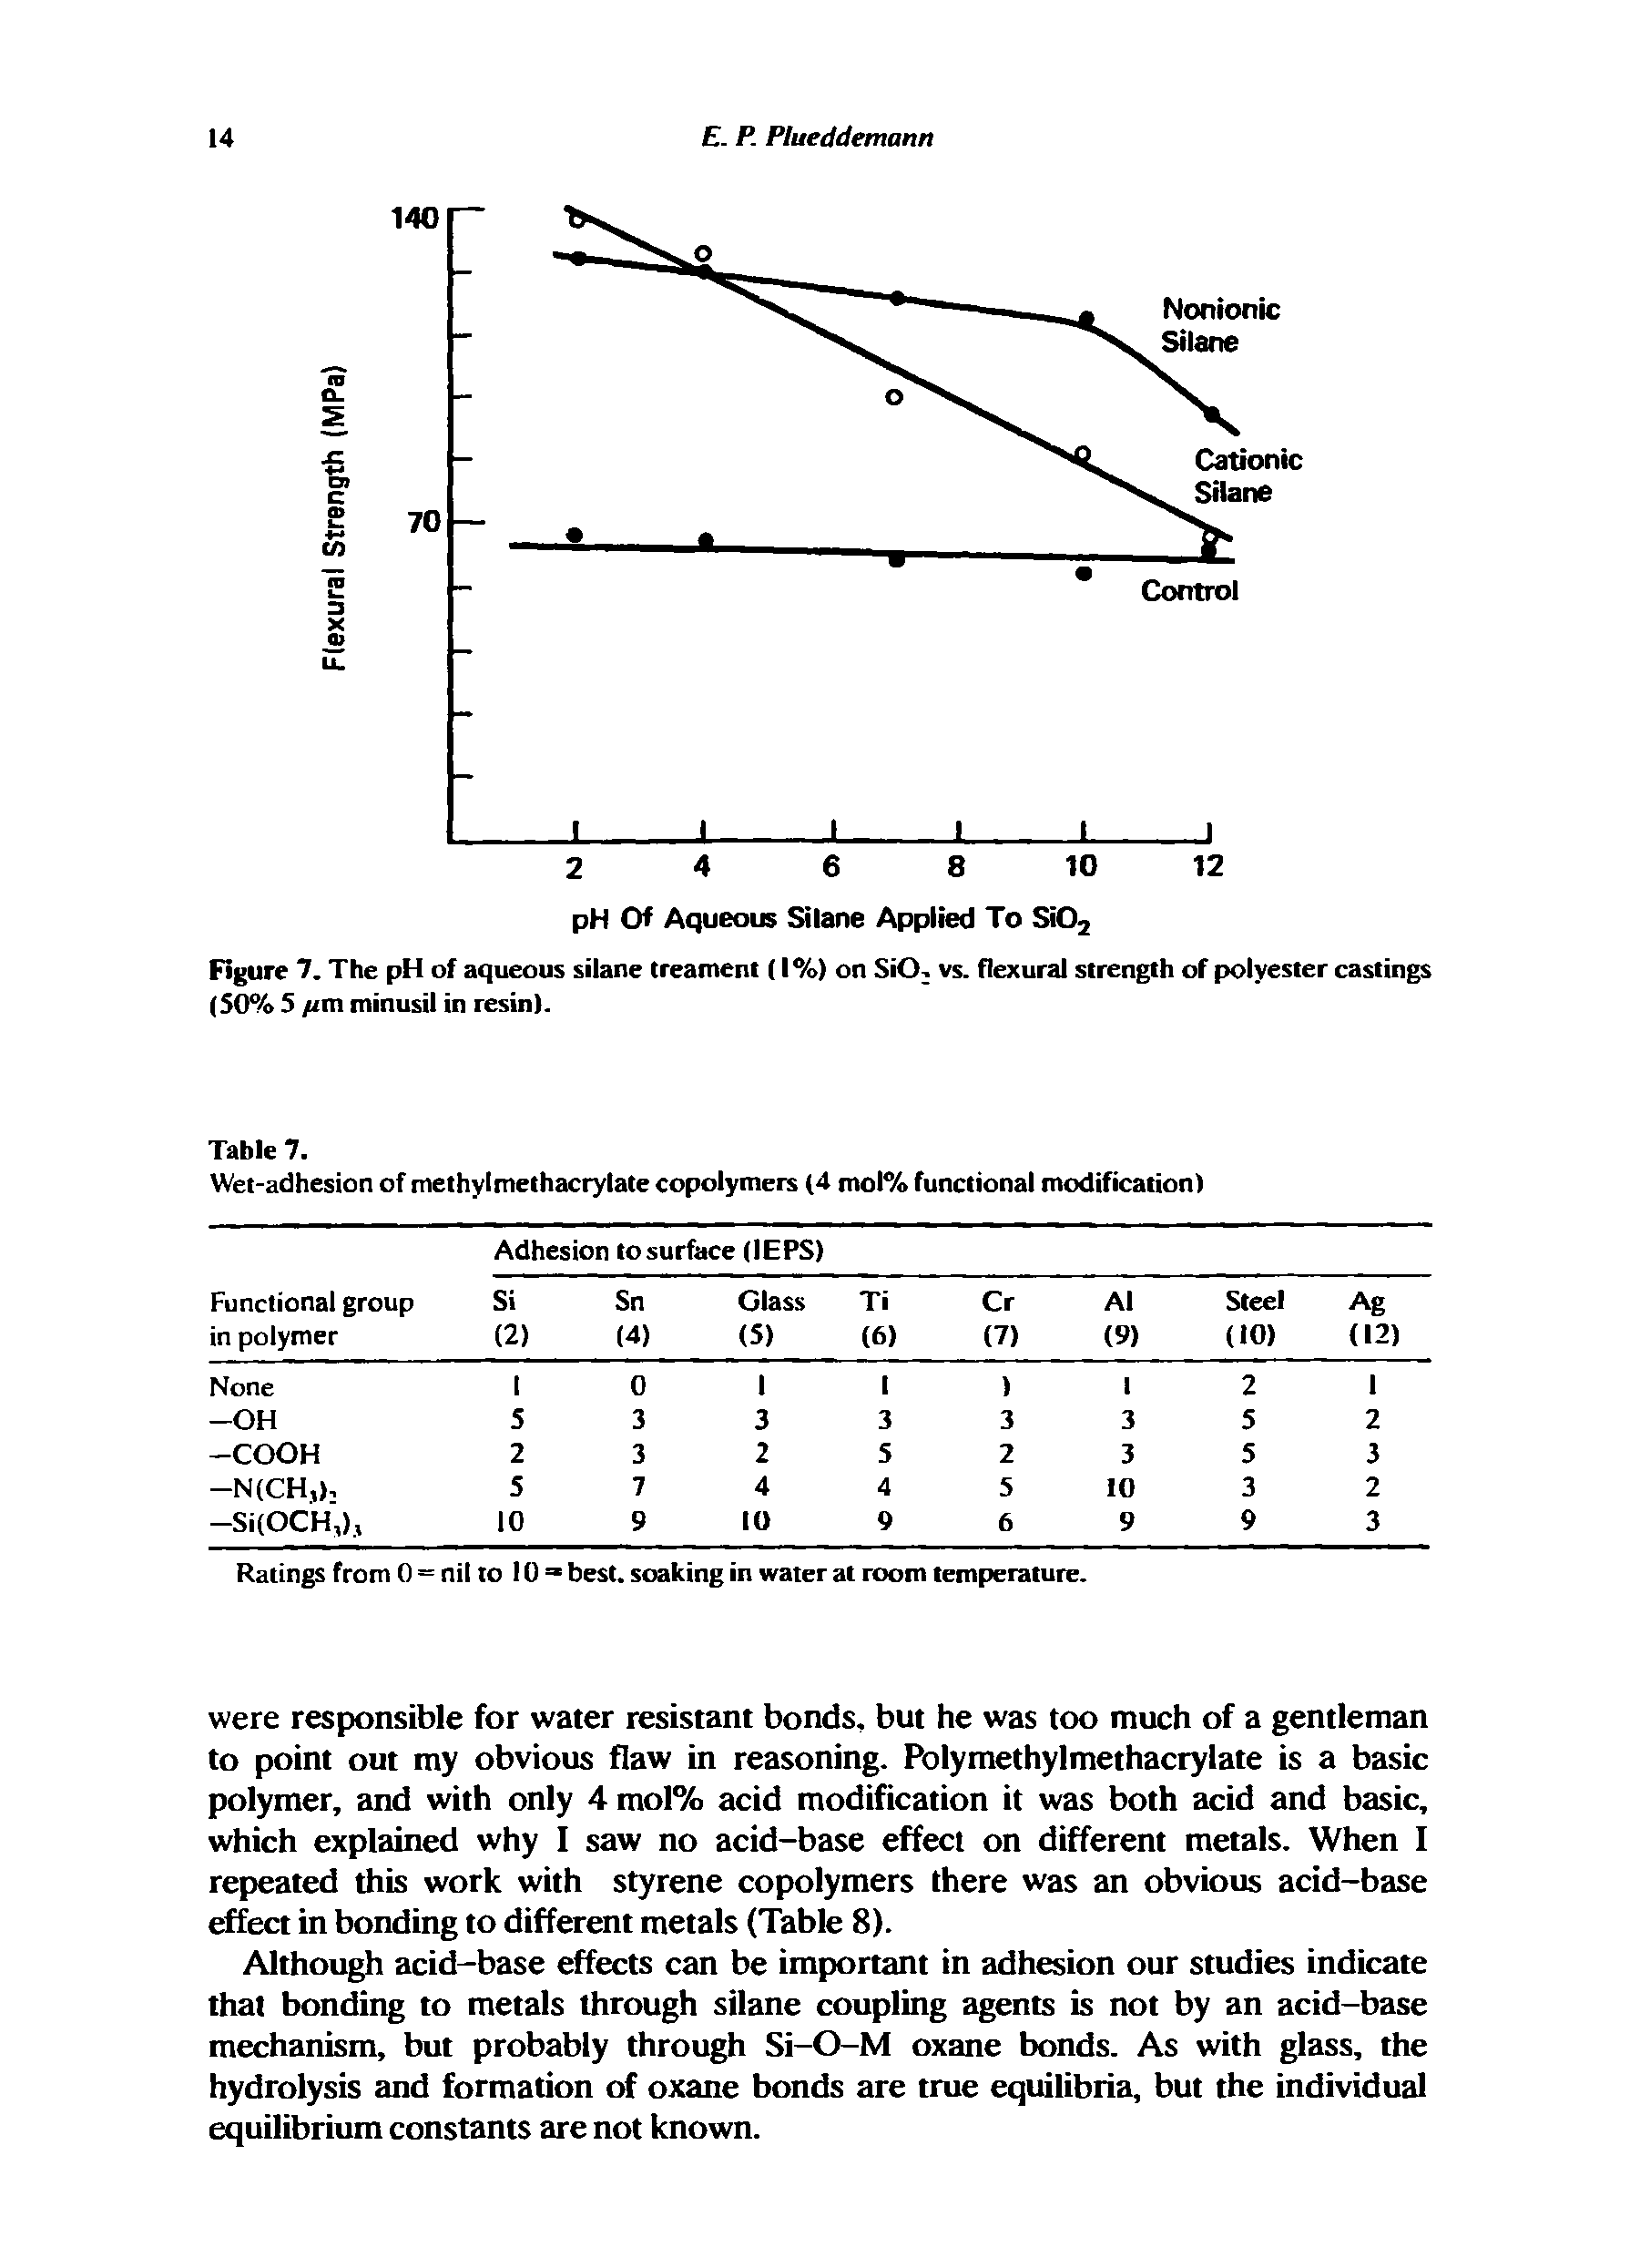 Figure 7. The pH of aqueous silane treament (1%) on SiO vs. flexural strength of polyester castings (50% 5 fim minusil in resin).